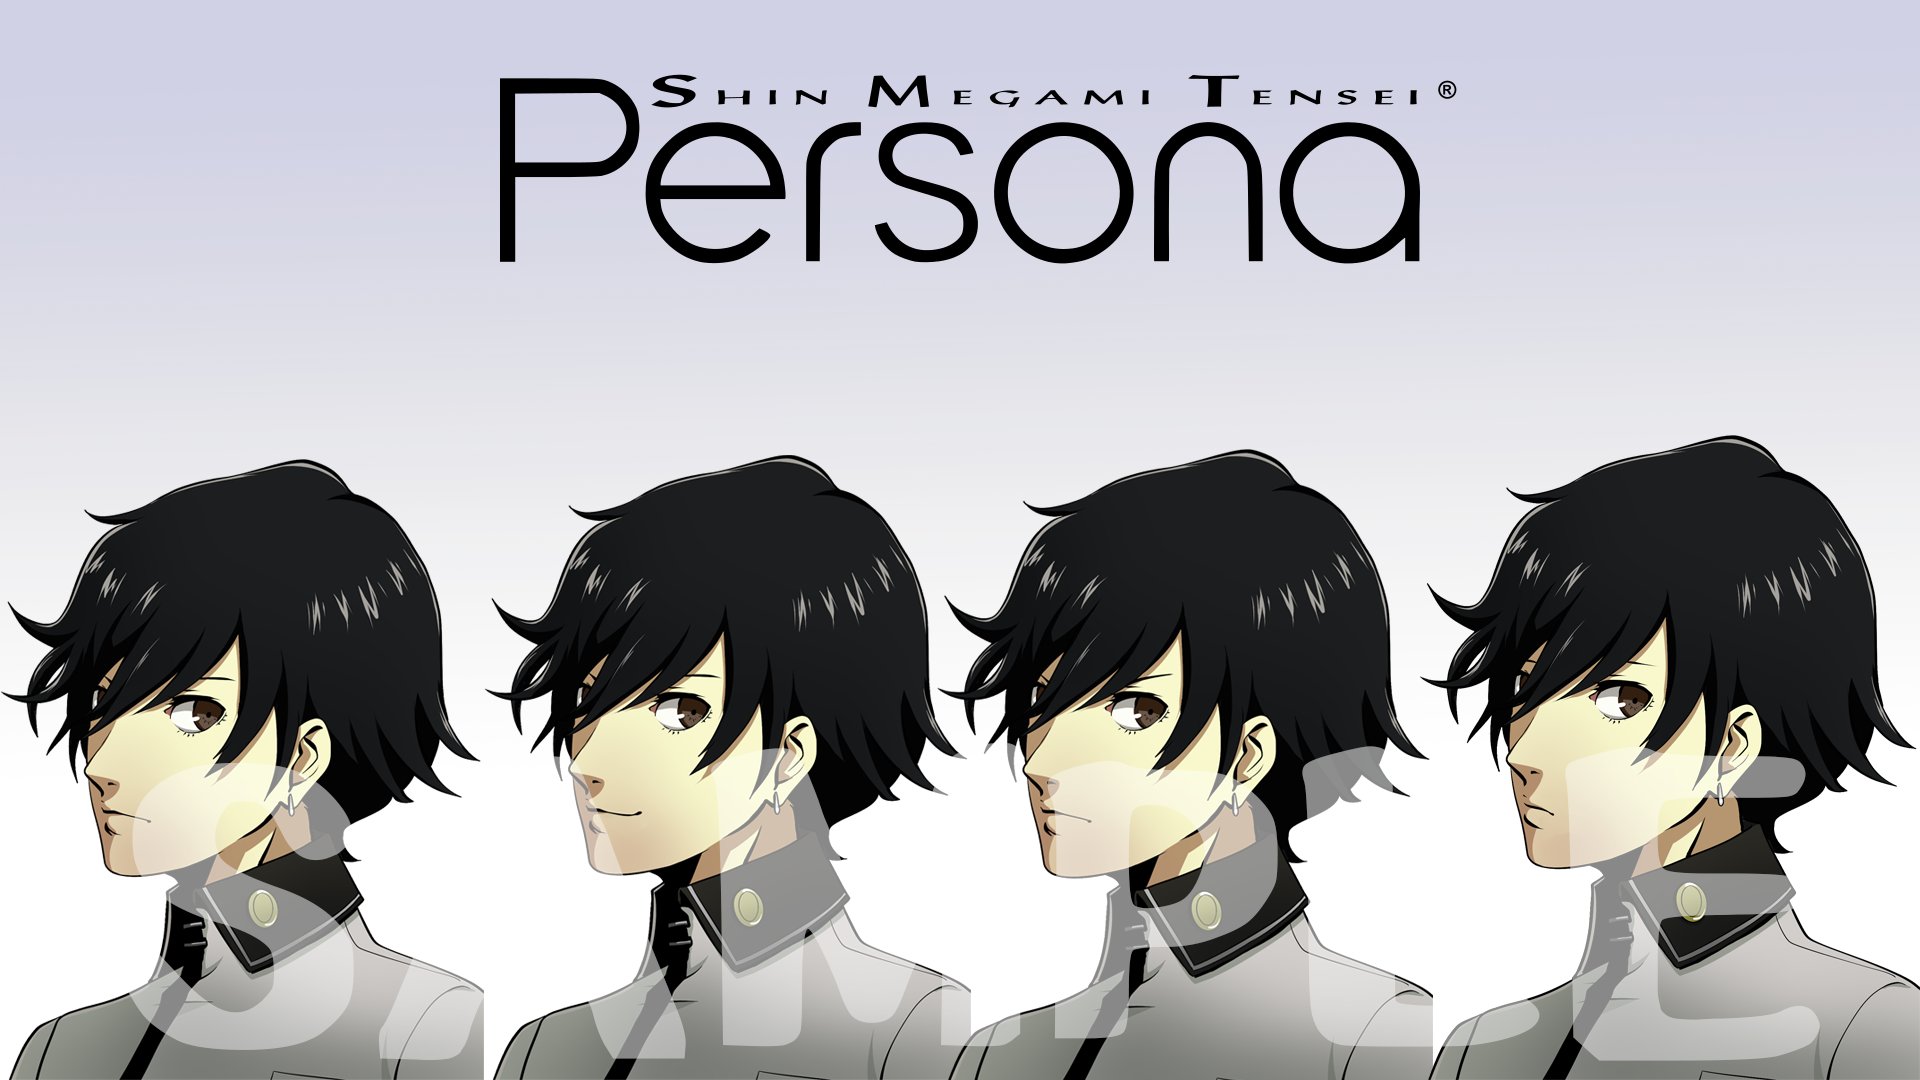 Ren Amamiya Non Persona 5 Post Finally Worked On Naoya S Sprites I M Thinking If I Should Work On P3 S Female Protagonist Next T Co J8uw6xxde6